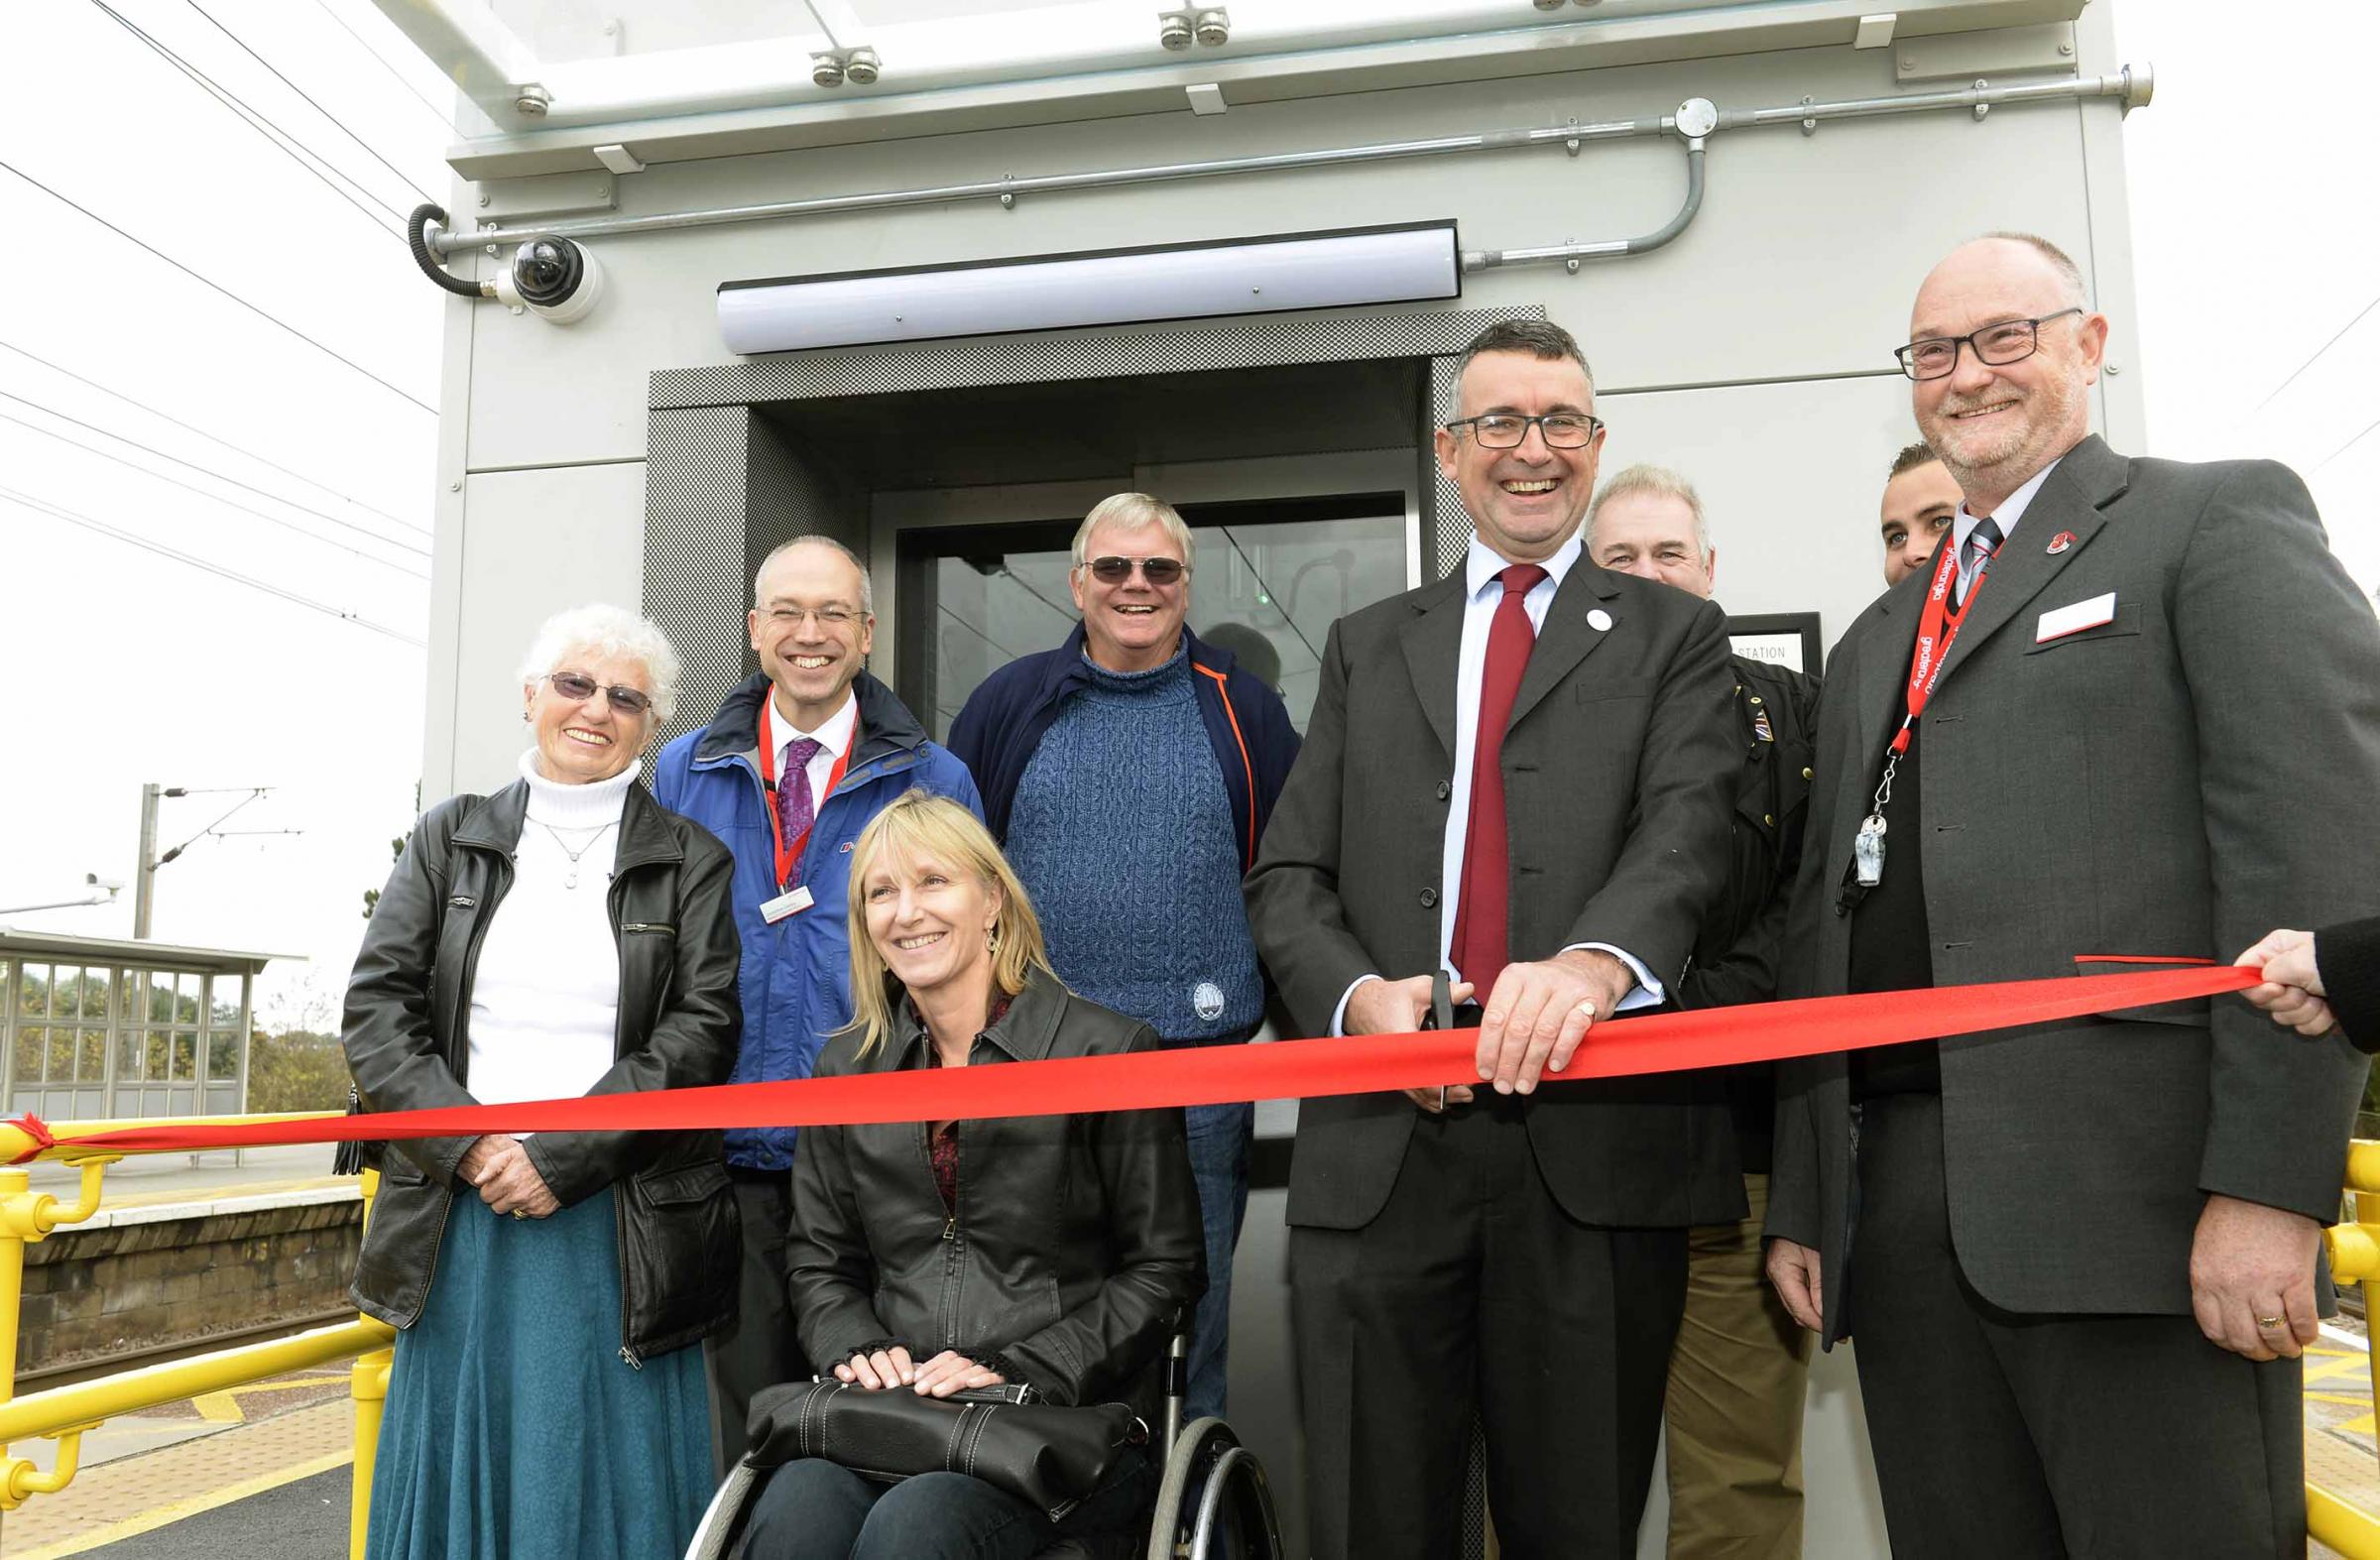 Disability campaigners celebrate opening of £3million scheme at railway station